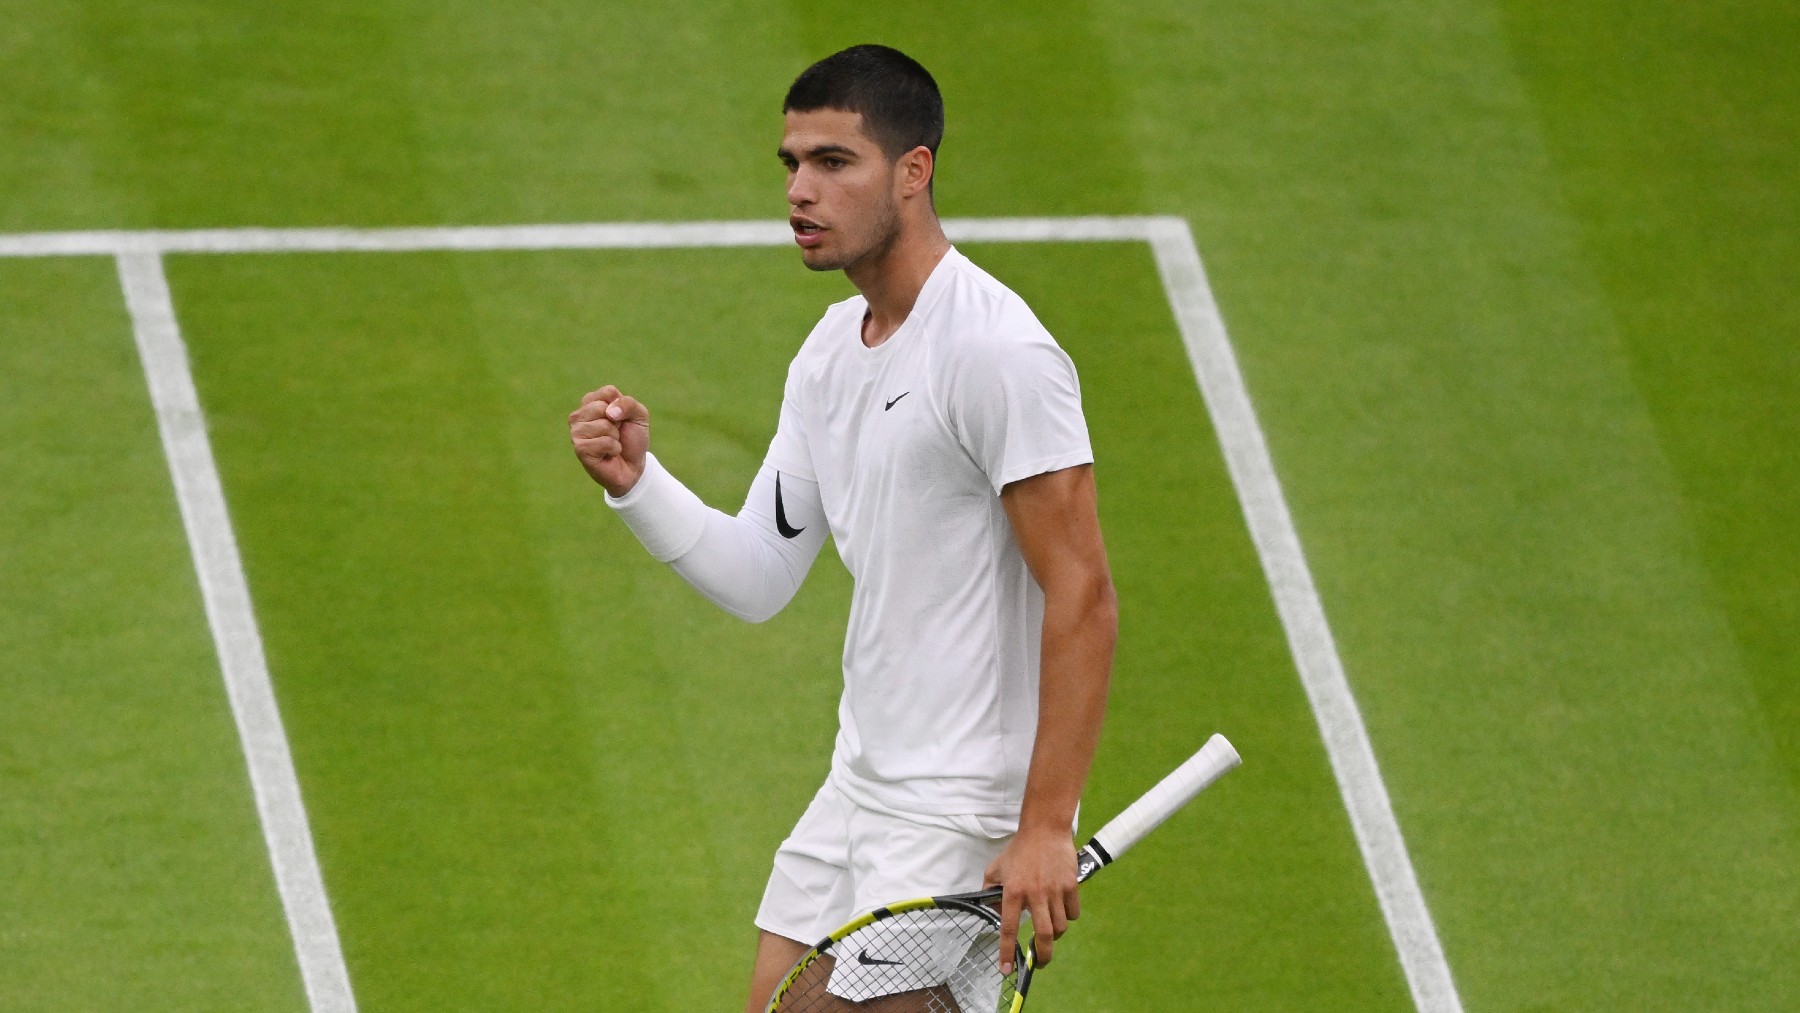 What happened to Carlos Alcaraz’s arm in his first Wimbledon match?